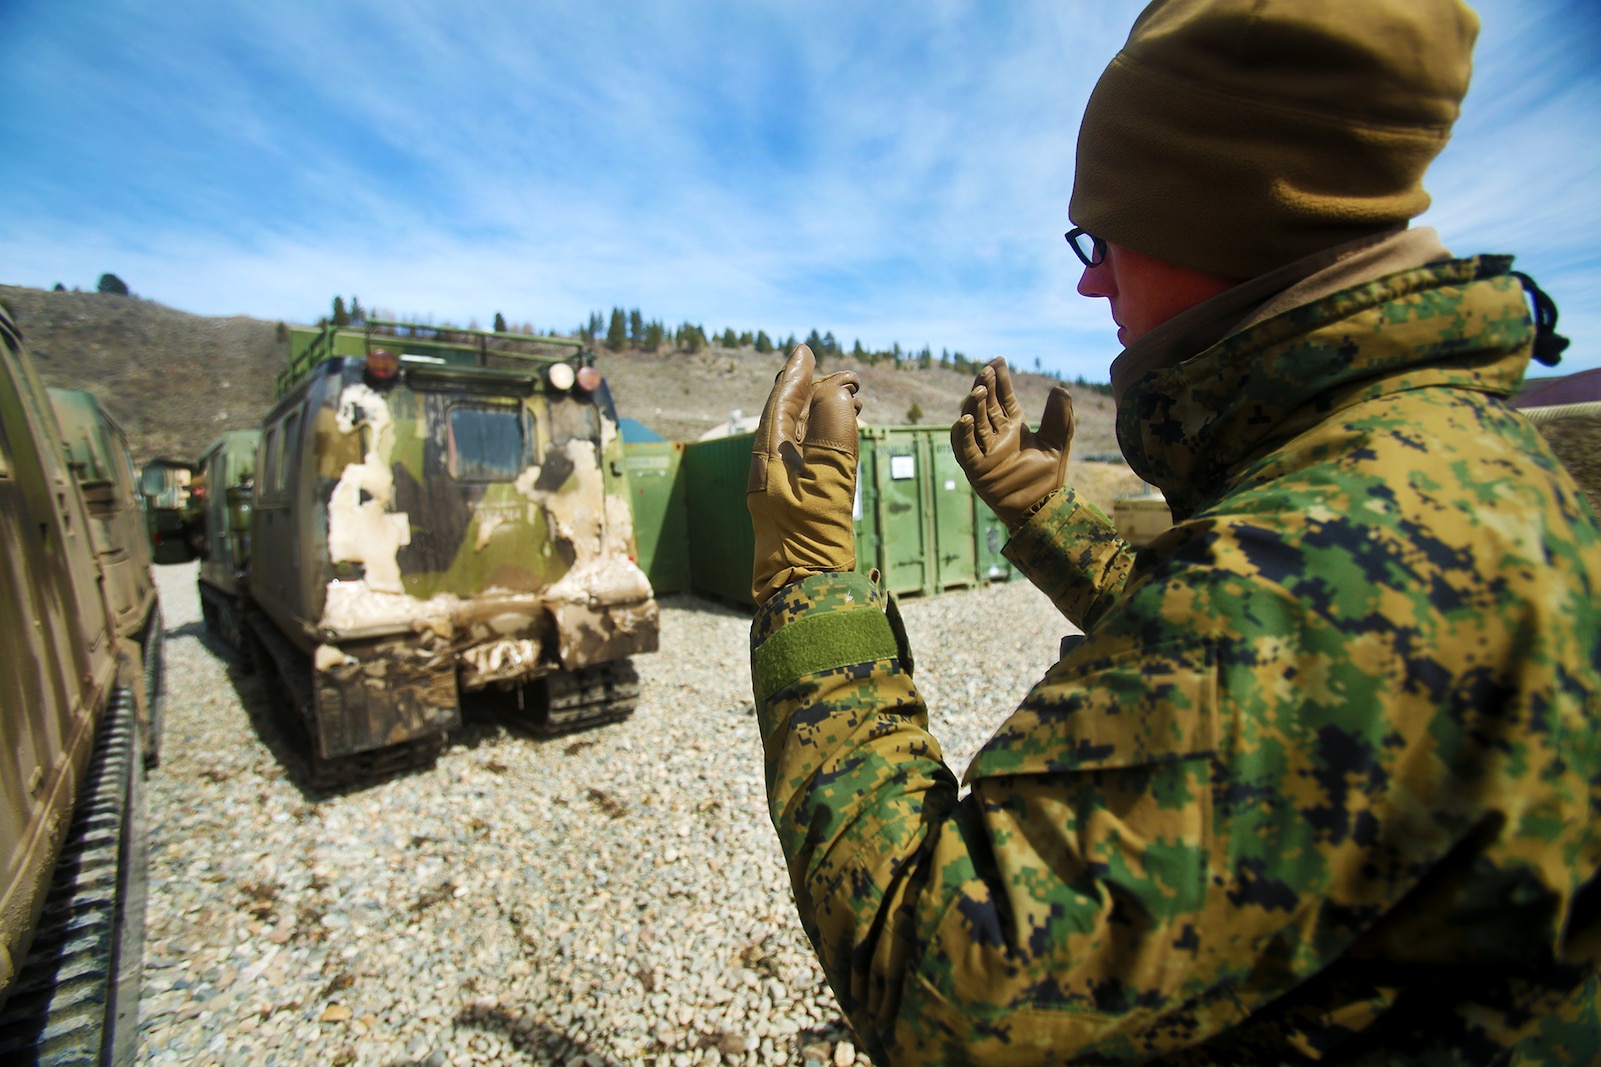 U.S. Marine Cpl. Matthew McGill guides a small unit support vehicle (SUSV) during a cold weather training exercise at the Mountain Warfare Training Center in Bridgeport, Calif., March 17, 2016. McGill, a heavy equipment operator with Alpha Company, 7th Engineer Support Battalion, 1st Marine Logistics Group, was among 90 Marines with 7th ESB who served as the logistics combat element in support of 2nd Battalion, 4th Marine Regiment, 1st Marine Division, during Mountain Exercise 6-16, Feb. 24- March 26, 2016. (U.S. Marine Corps photo by Sgt. Laura Gauna/released)